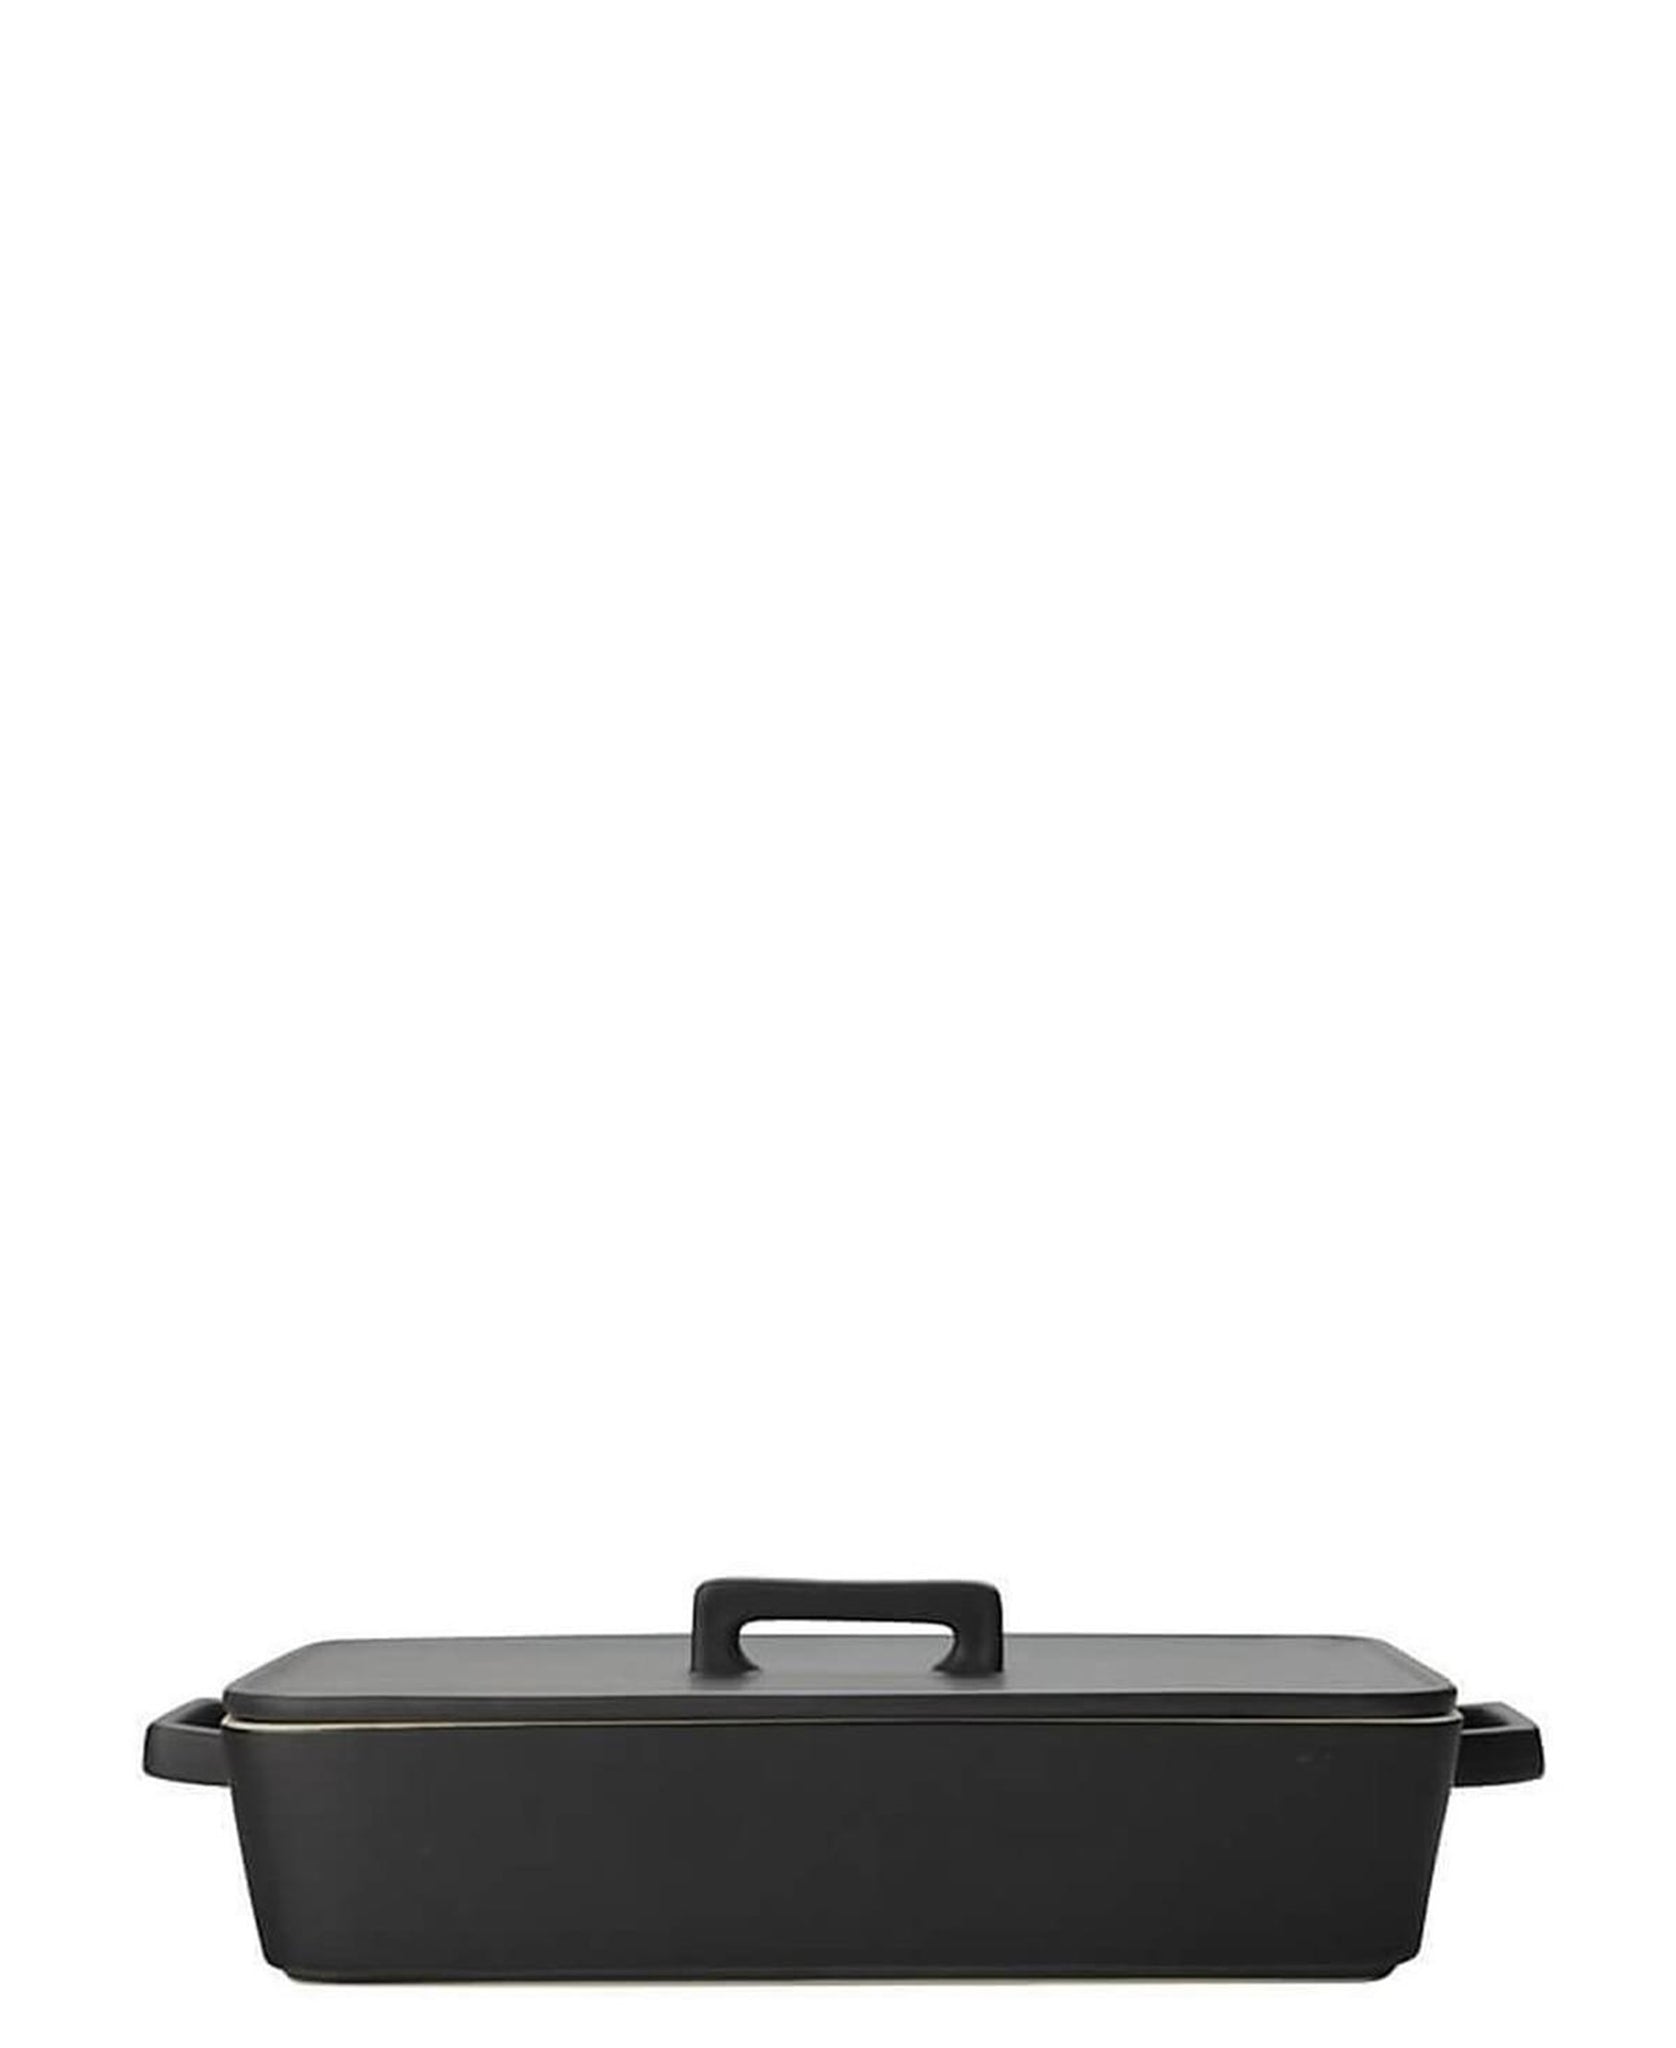 Maxwell & Williams Epicurious Rectangular Baker with Lid 32cm - Black